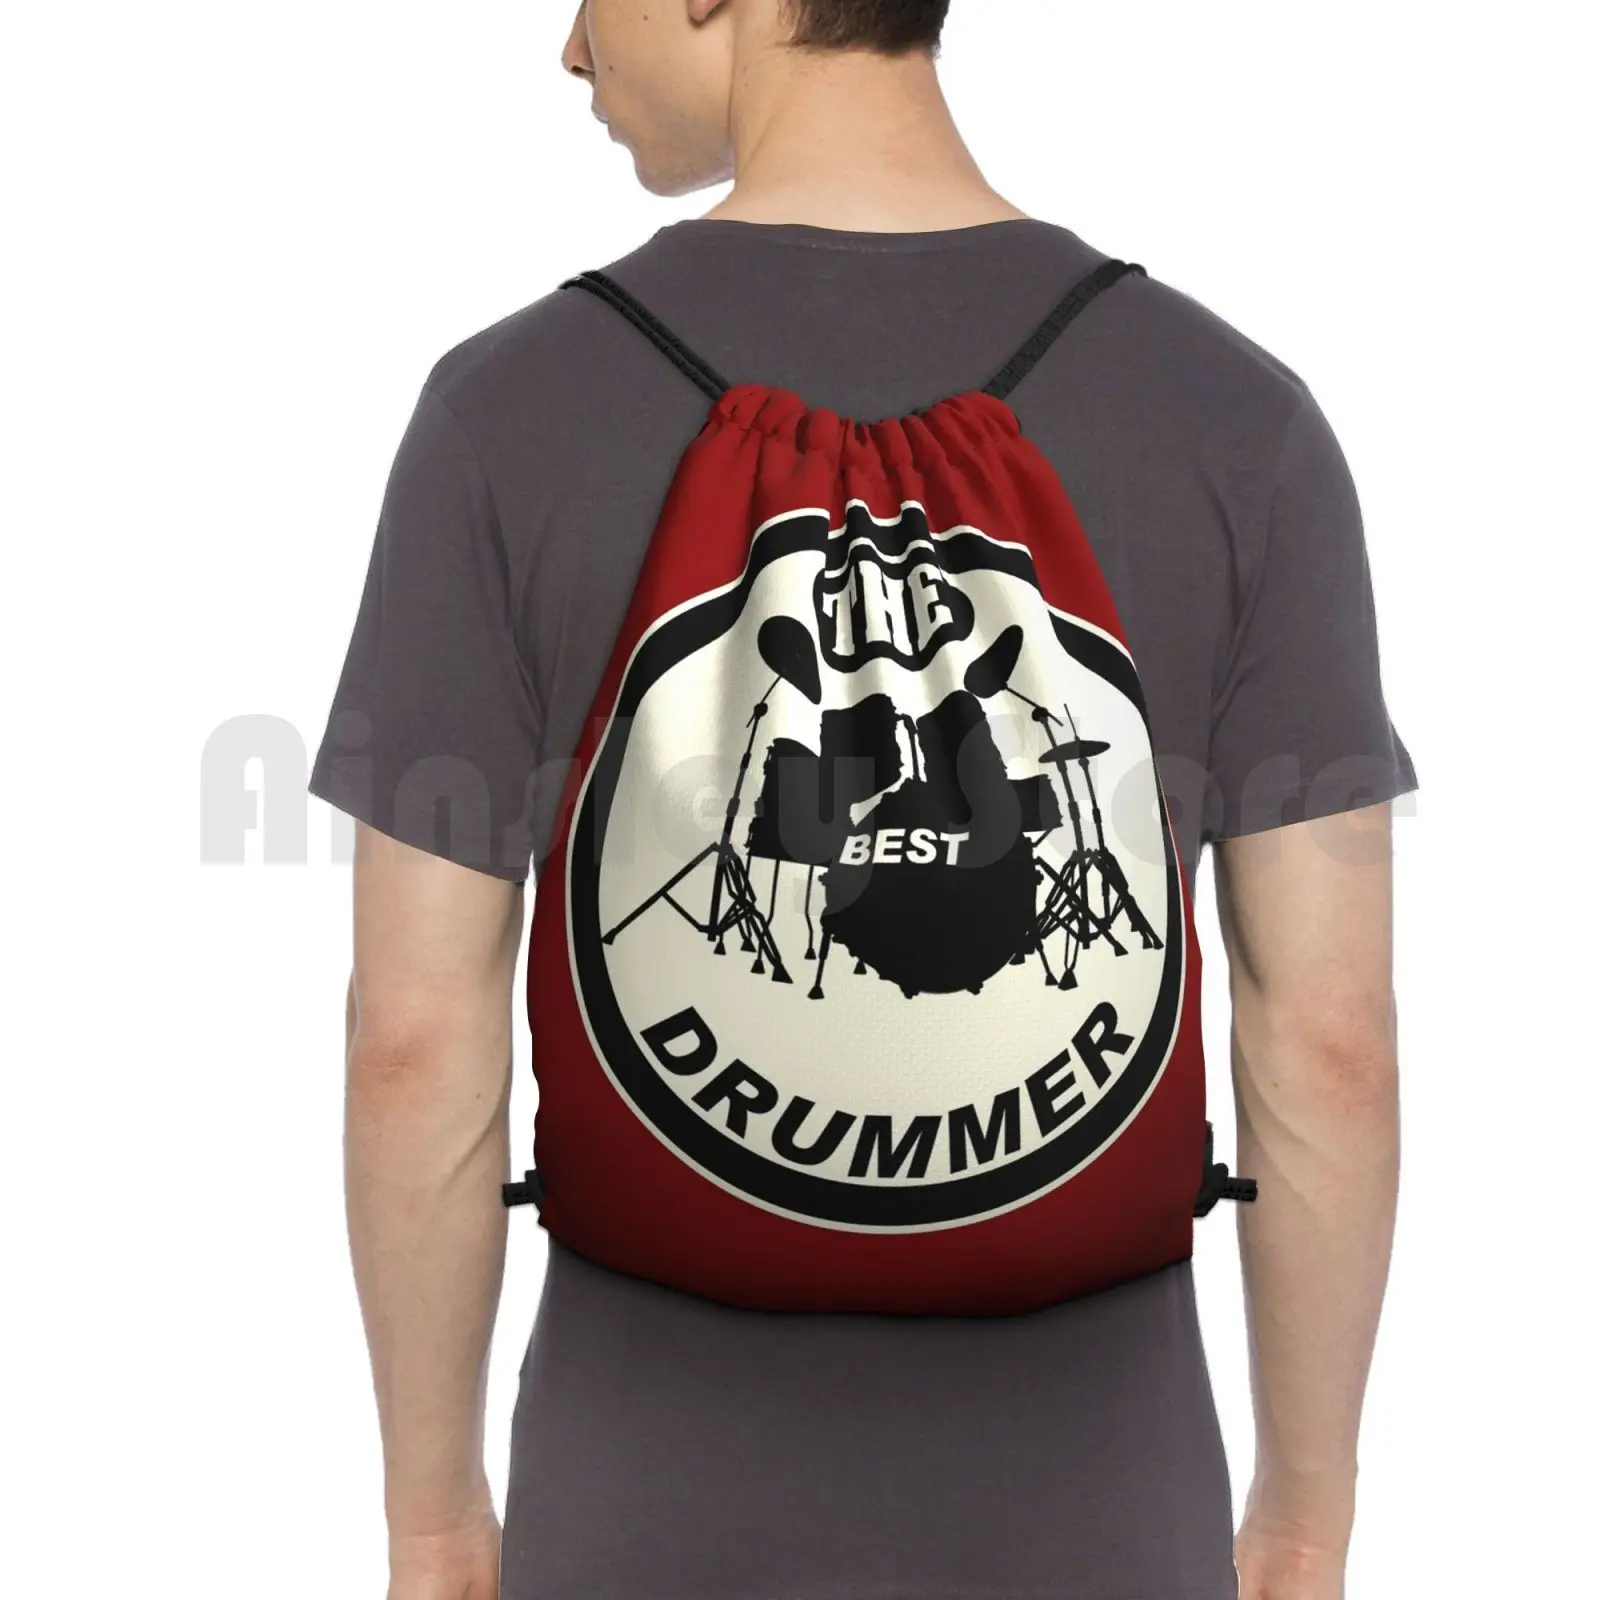 

The Best Drummer White Black Backpack Drawstring Bags Gym Bag Waterproof Drummer Drums Drum Percussion Musician Music